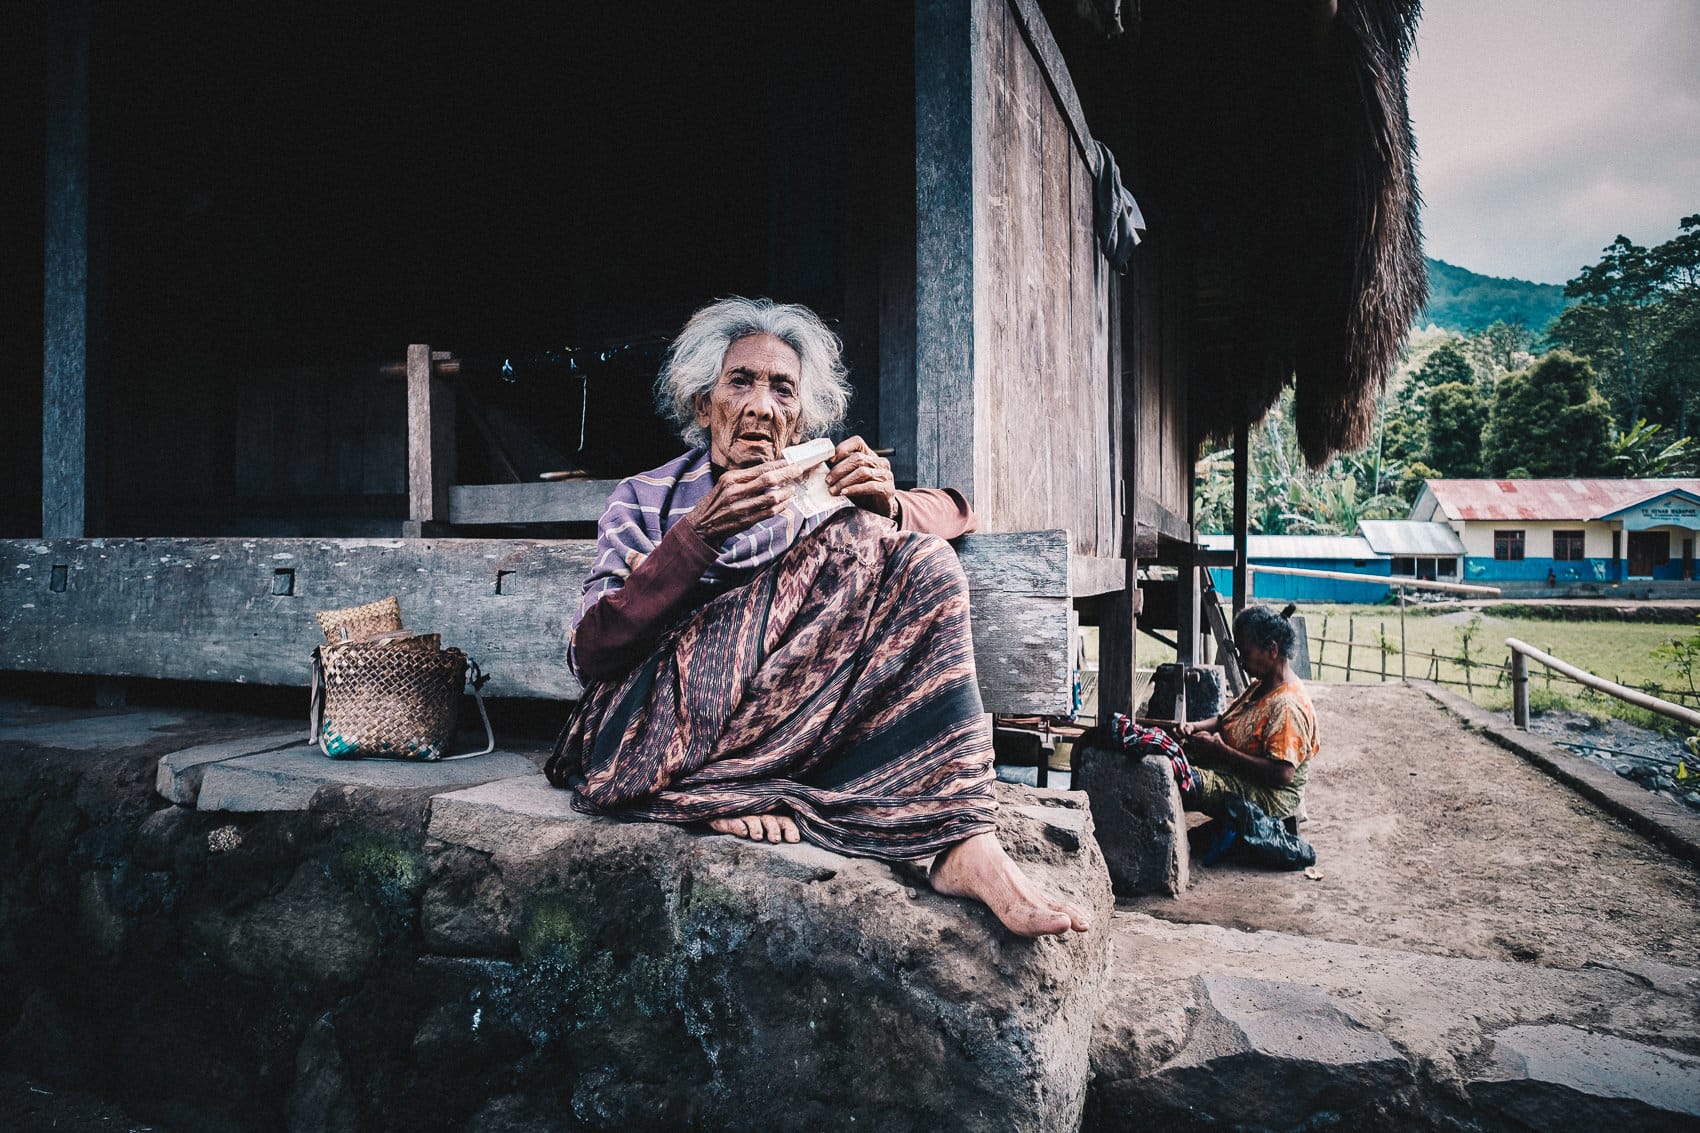 Ngada village, Flores, Indonesia. March 2018